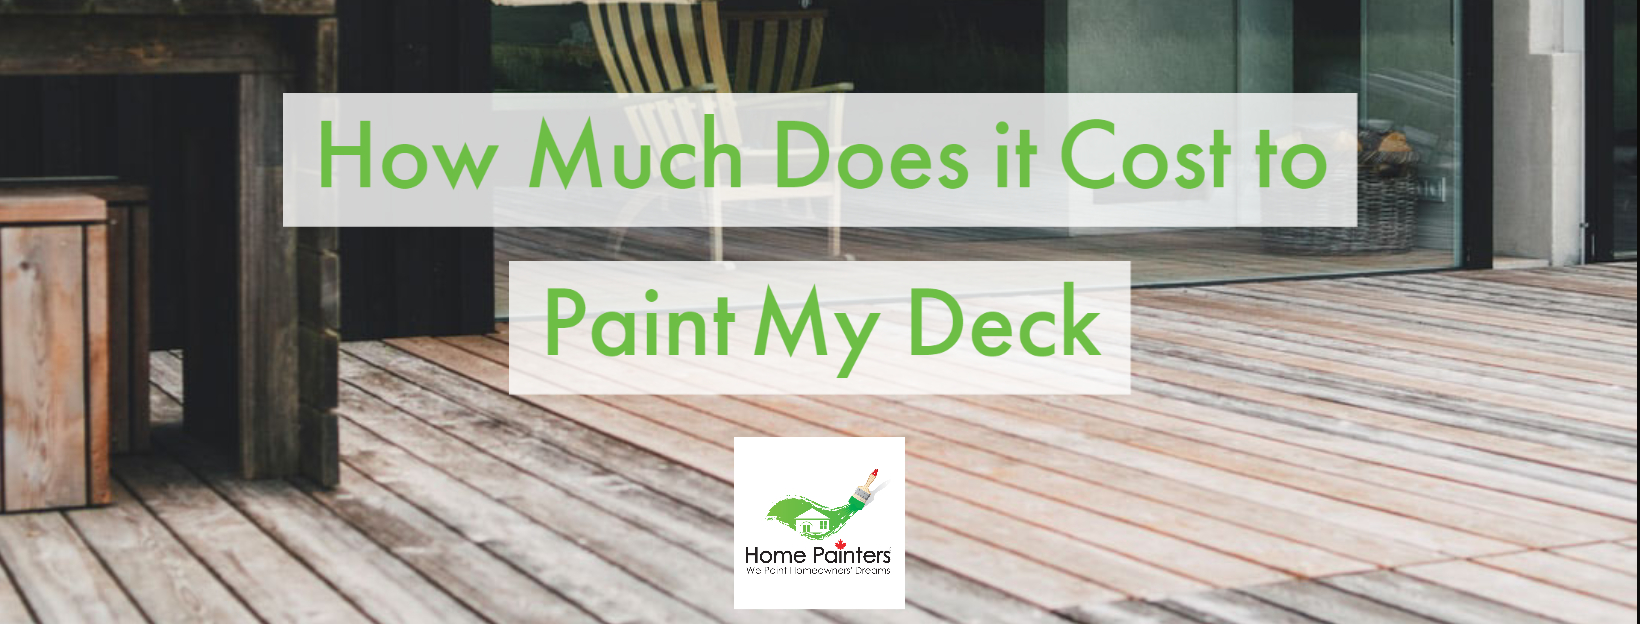 How Much Does it Cost to Paint My Deck? | Home Painters ...